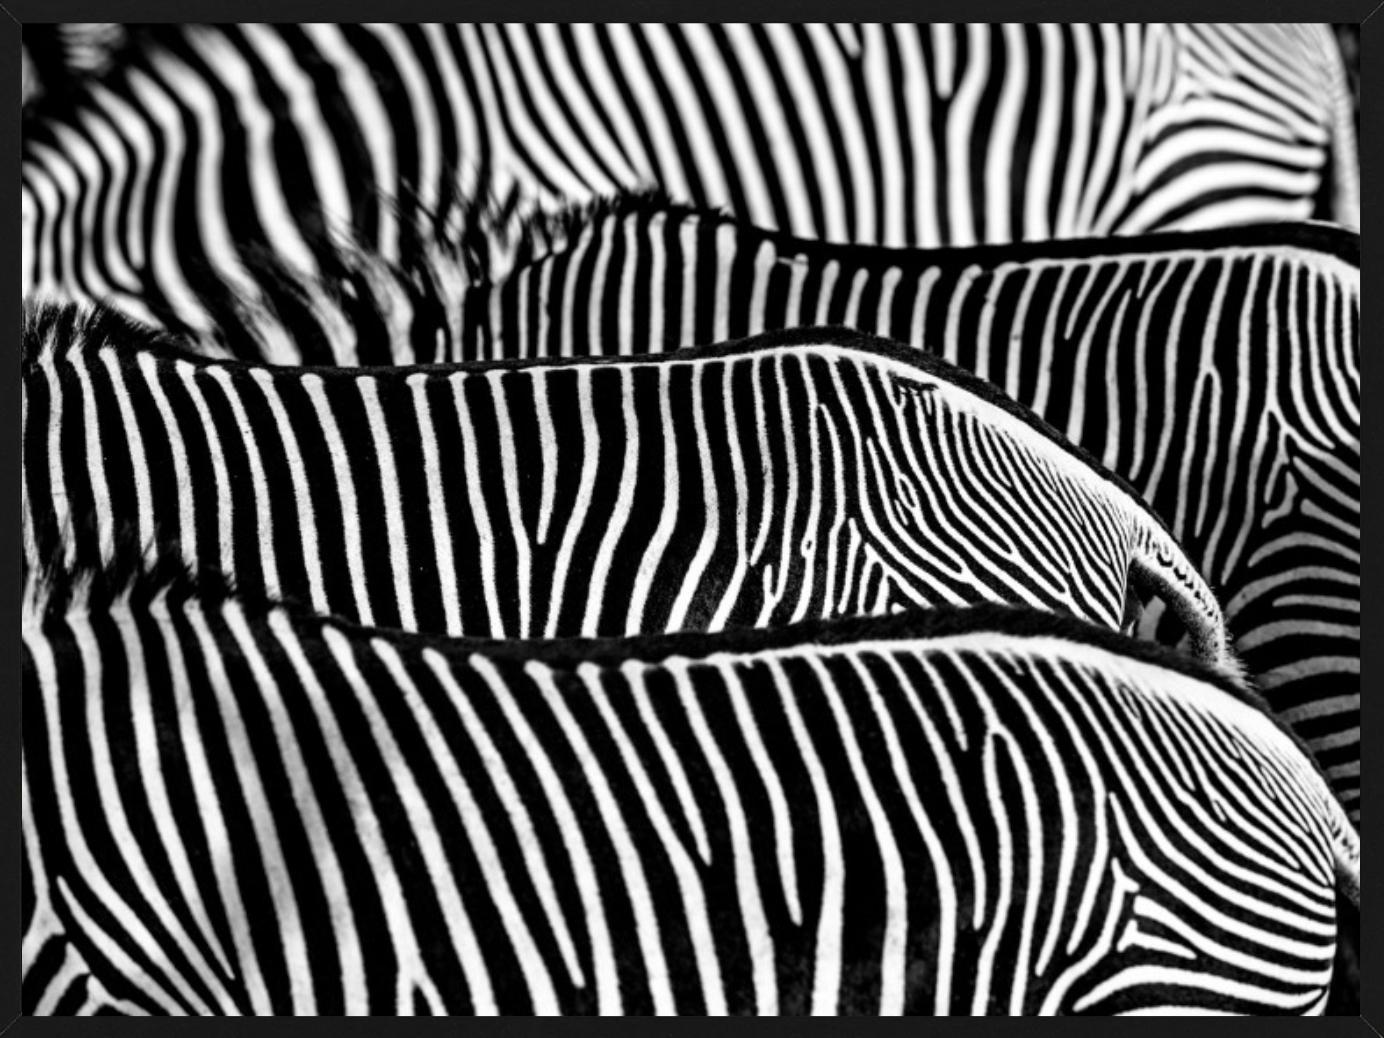 The Factory - fine art photography wildlife of zebras, abstract line pattern - Photograph by David Yarrow